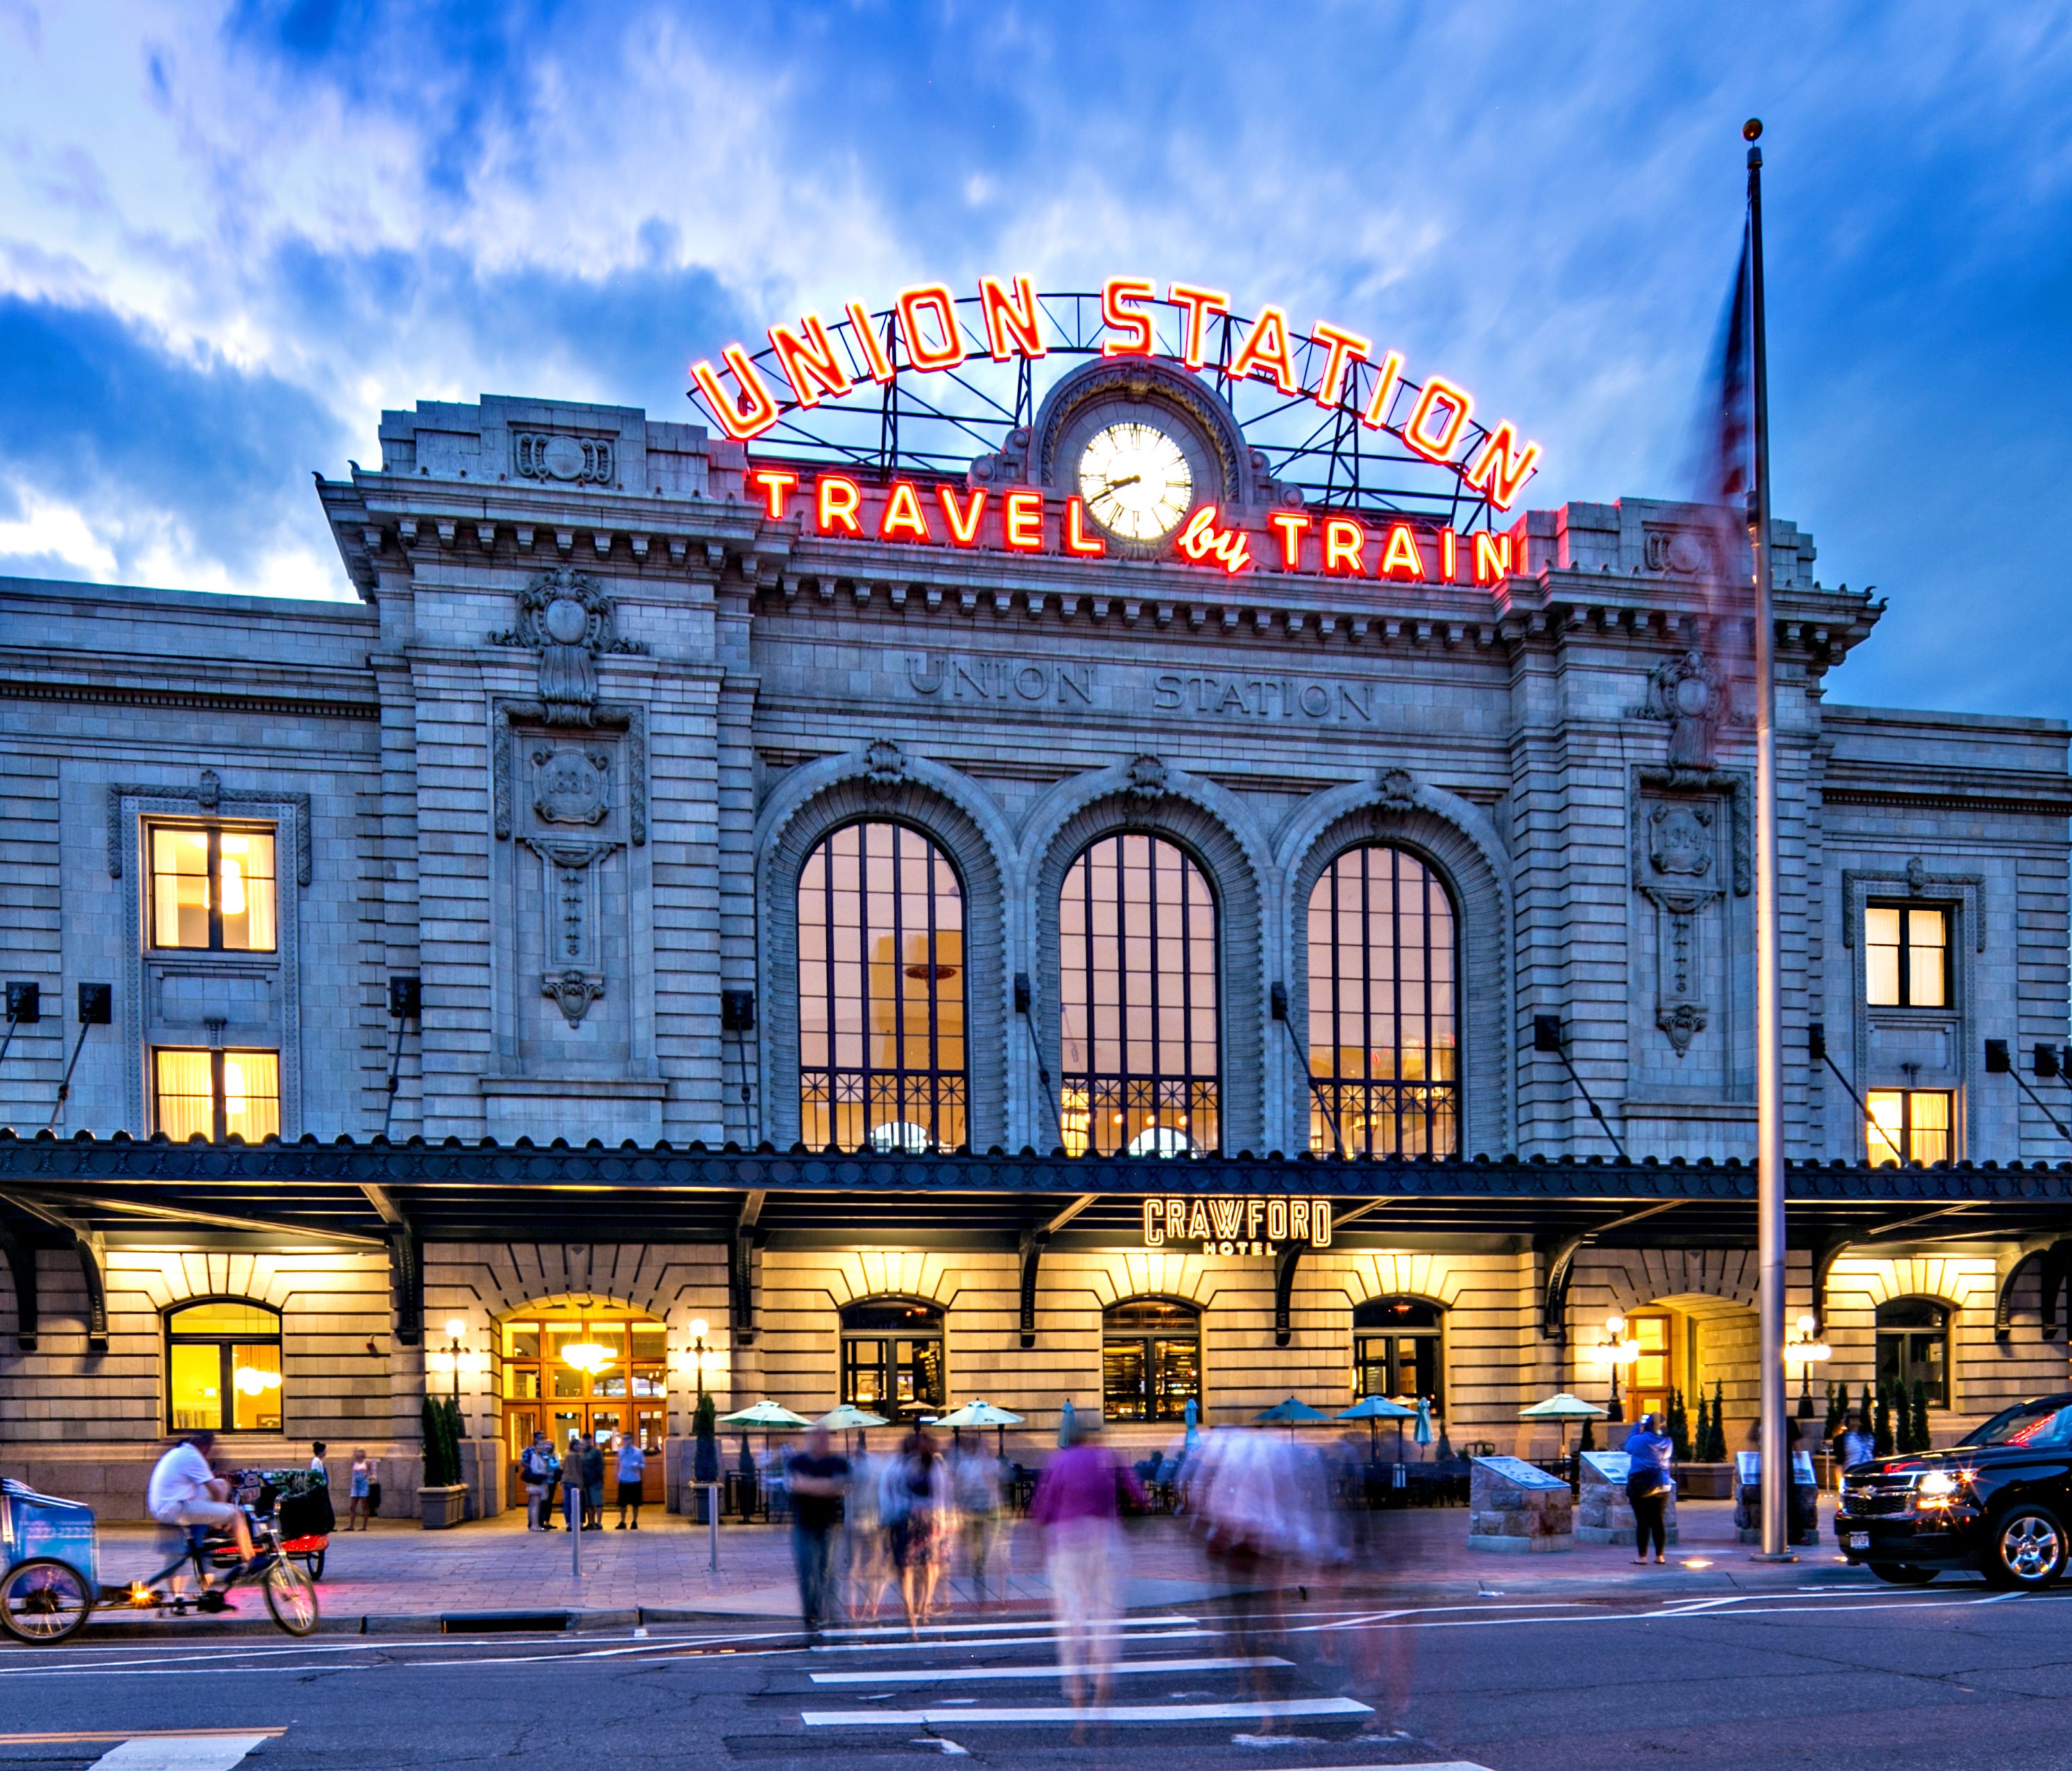 Denver Union Station: One hundred years after the original grand opening, a revitalized, restored and reinvigorated Denver Union Station reopened its doors in 2014, solidifying its position as the region's premier multimodal transit hub and becoming 